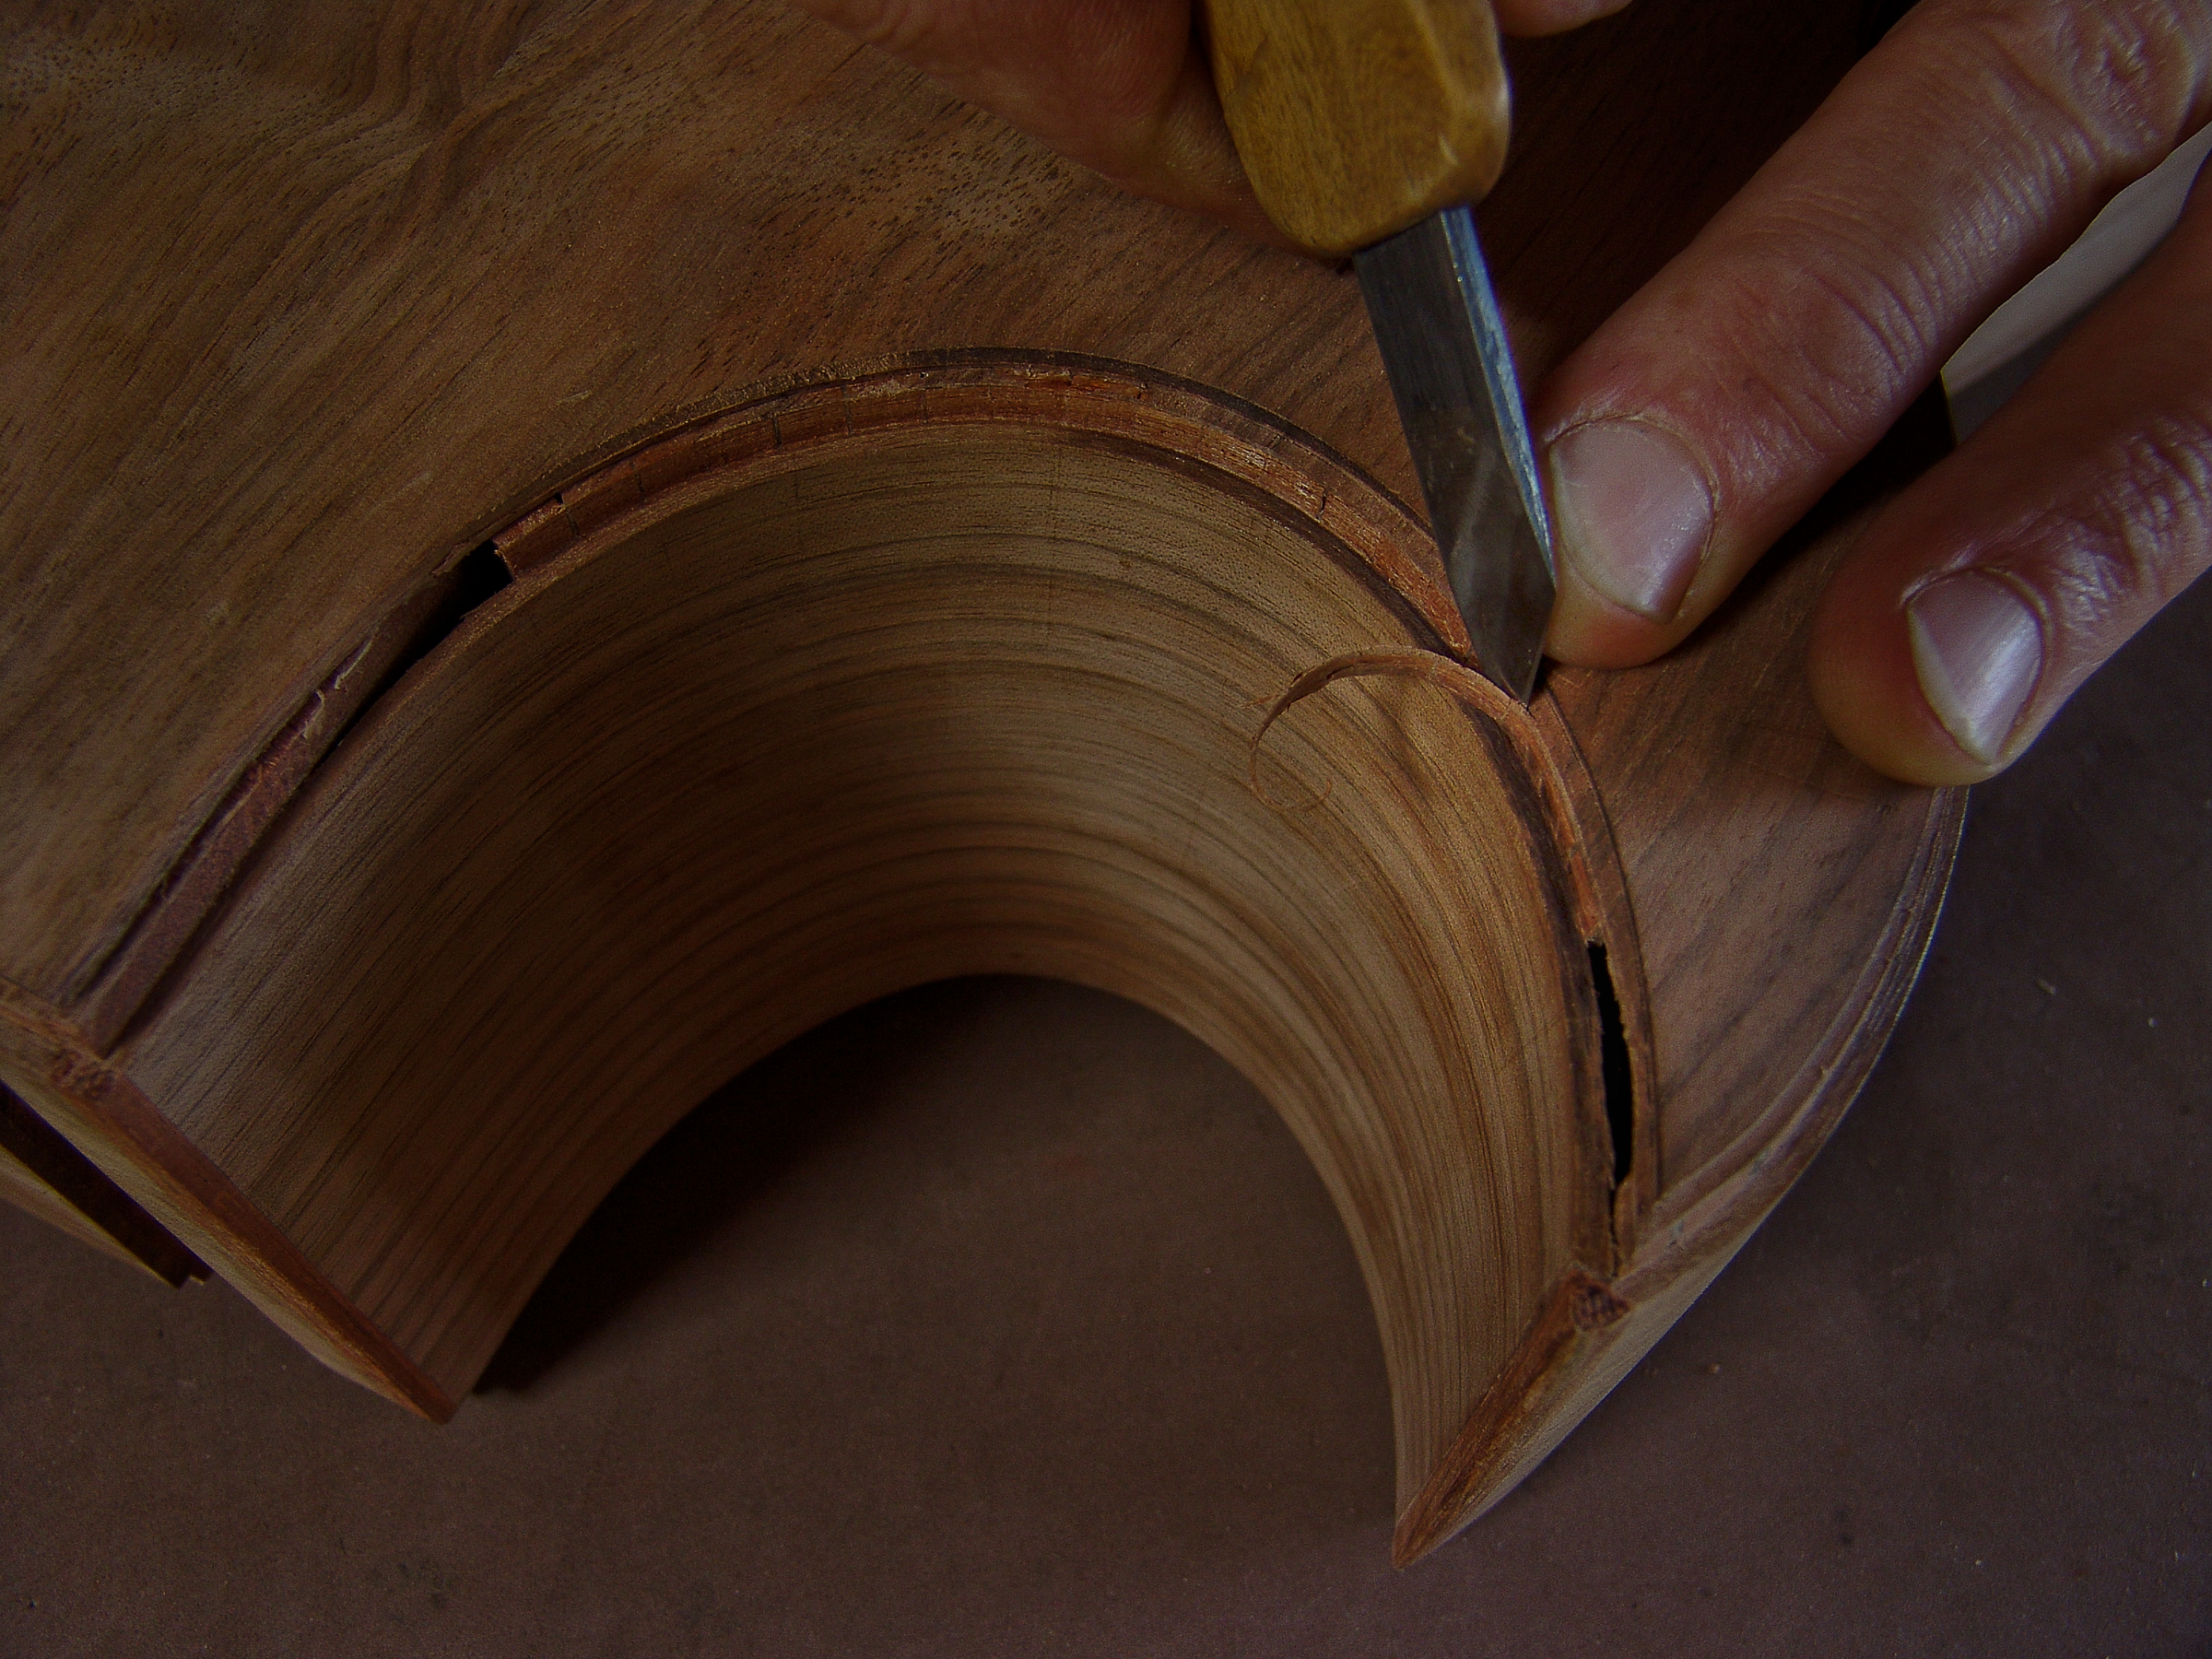 Guitar Maker Peter Stephen cuts out the slot for the purfling of a cutaway acoustic guitar